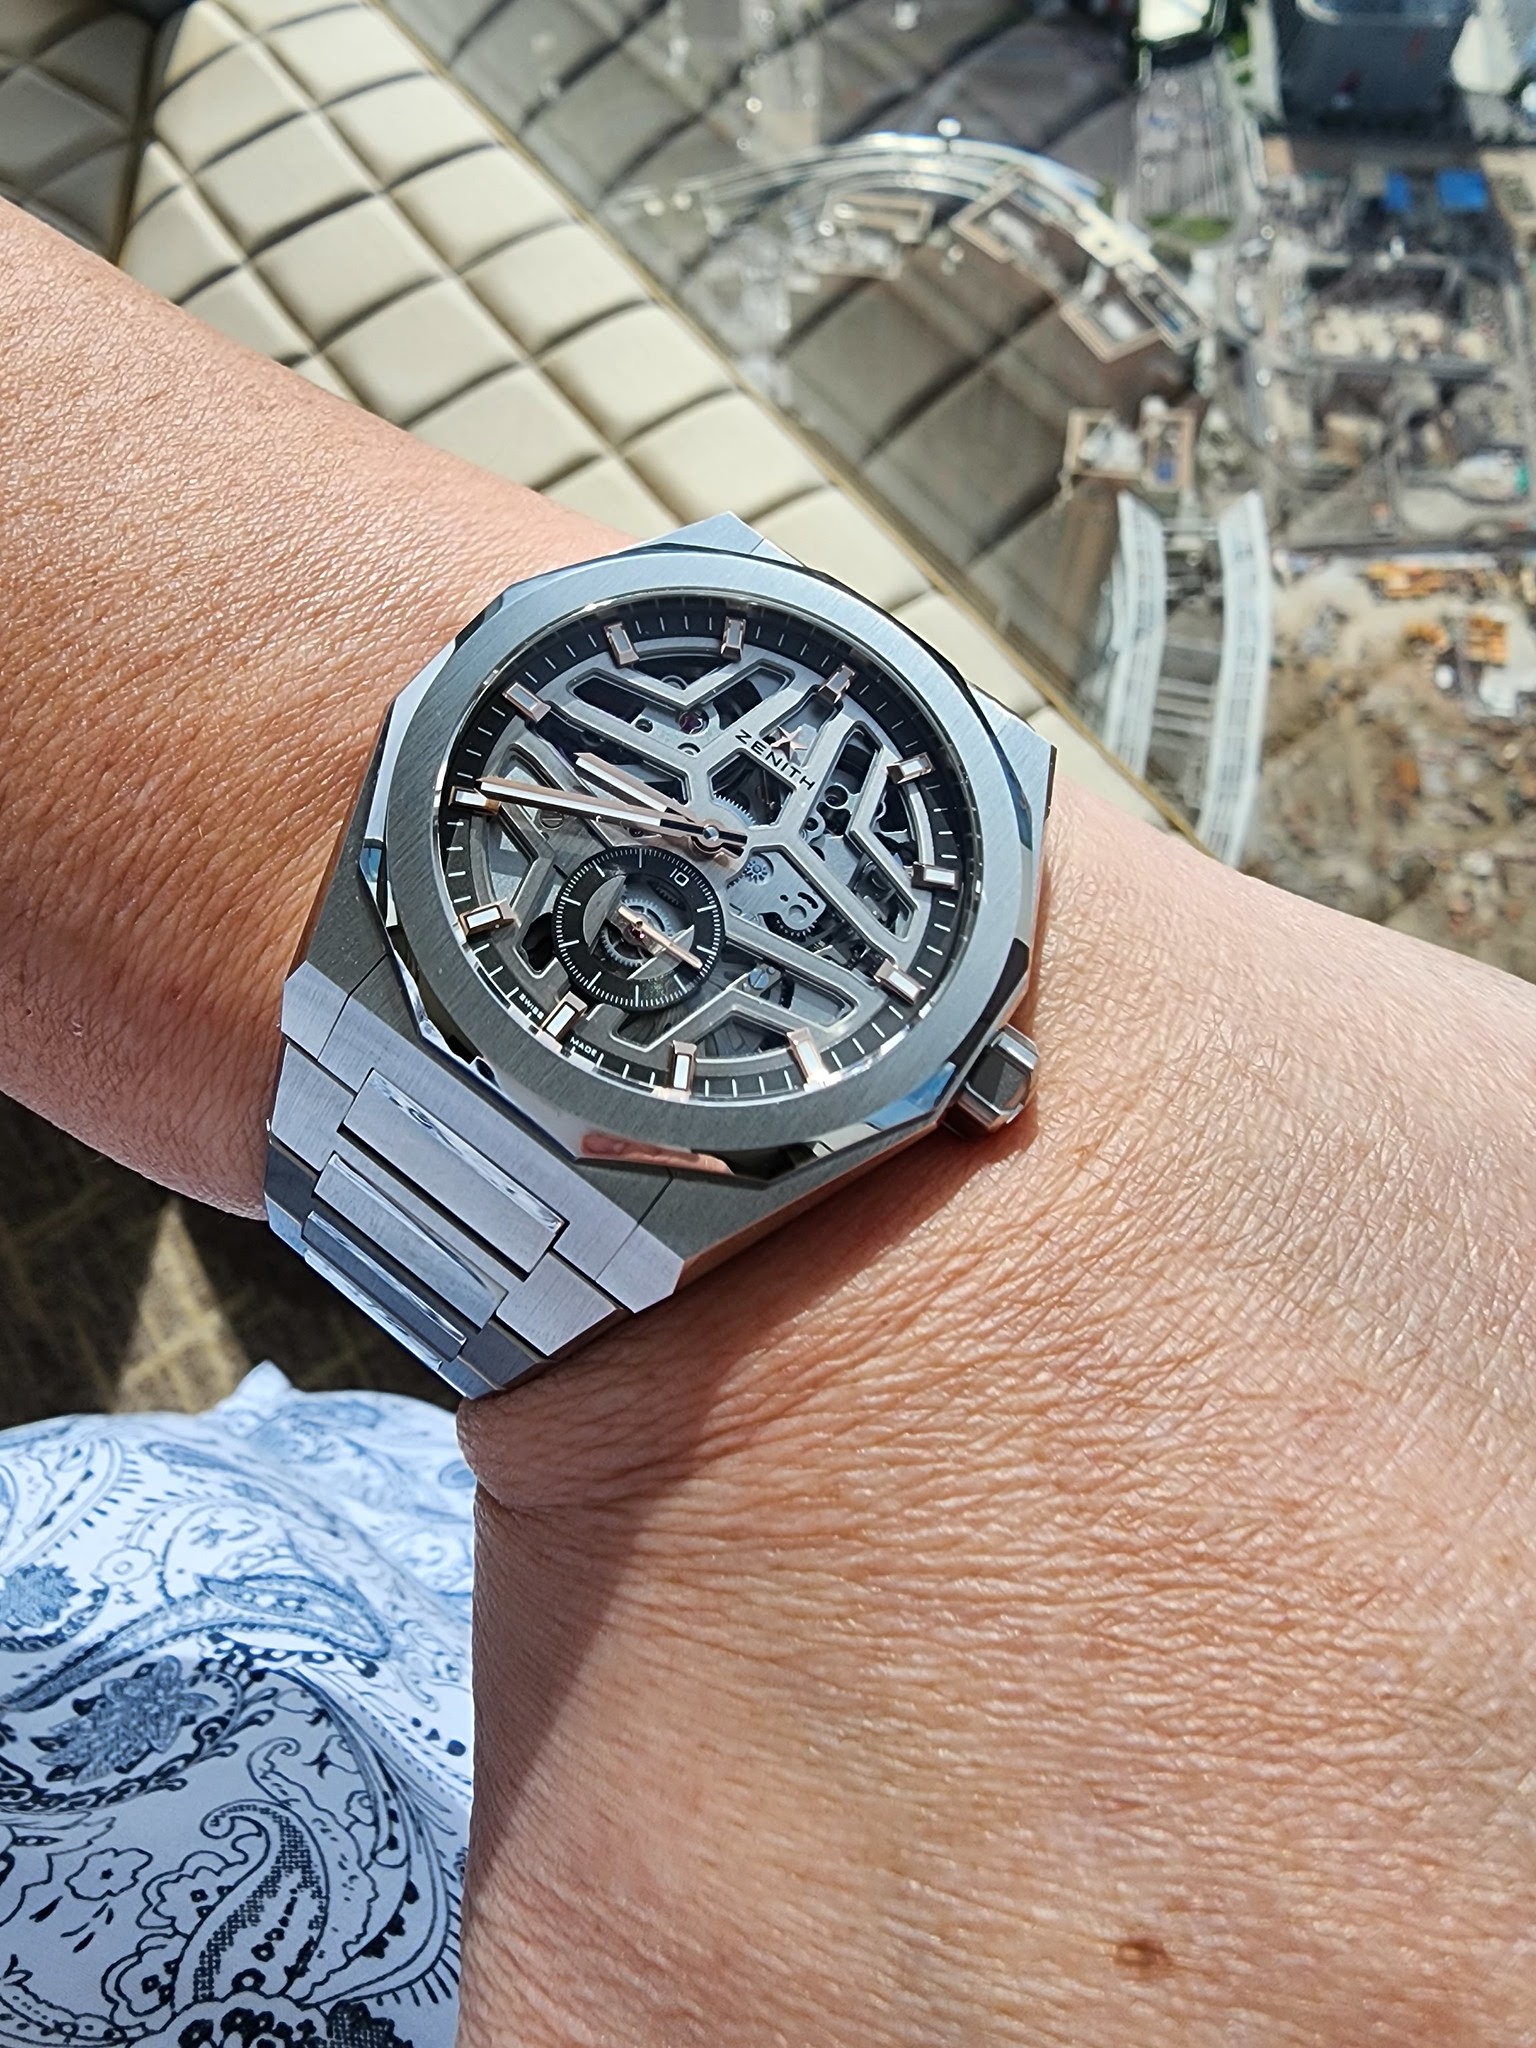 Hands-On - The New Zenith Defy Skyline Boutique Edition